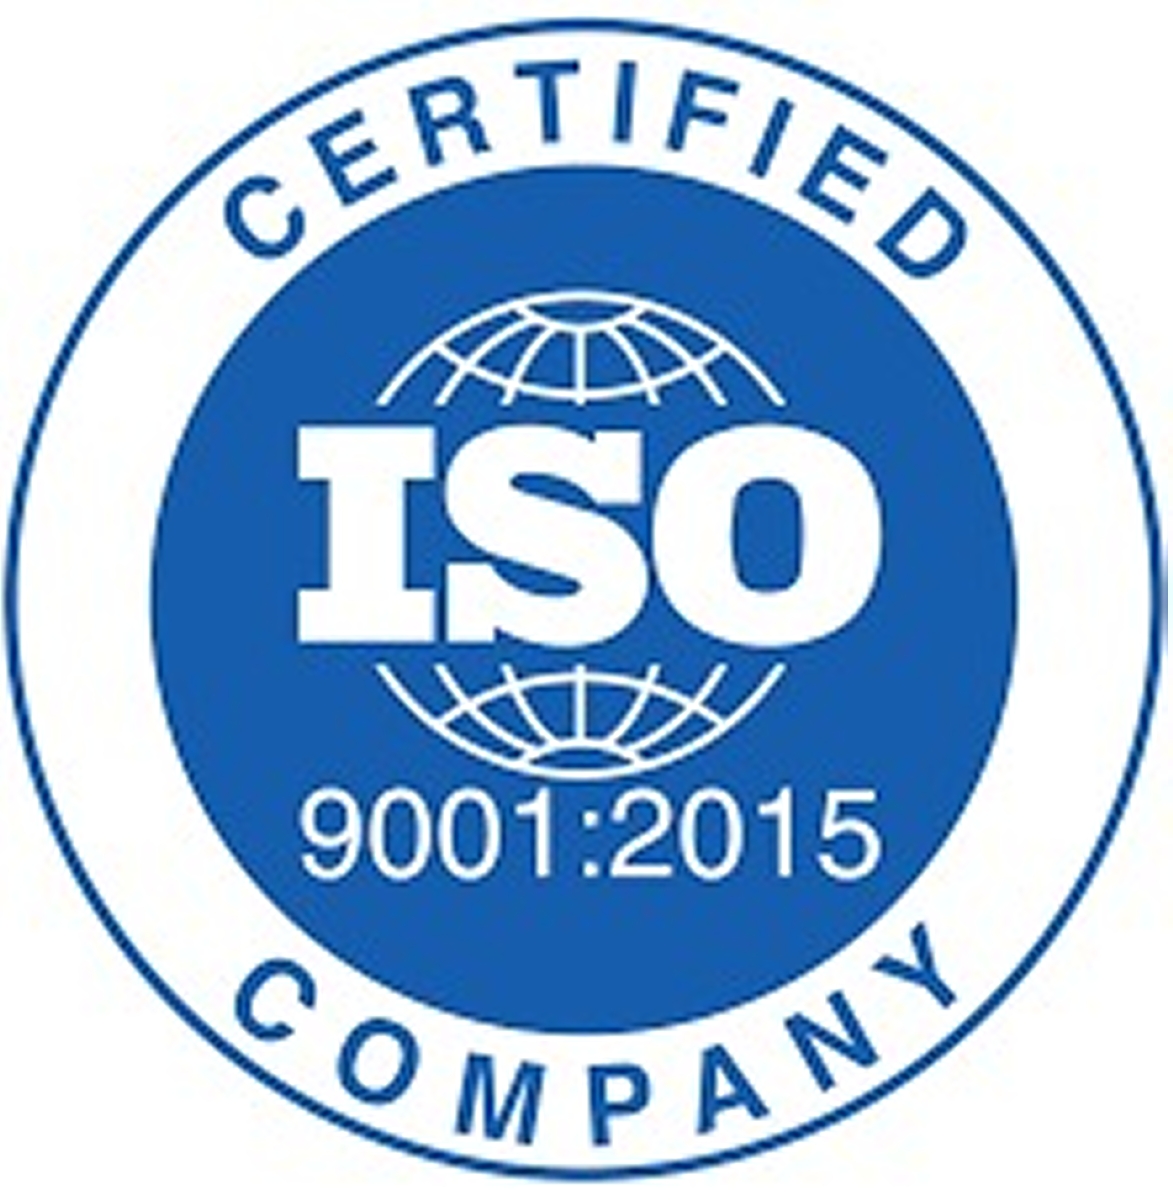 MULTIAX gets awarded with ISO 9001: 2015 certification